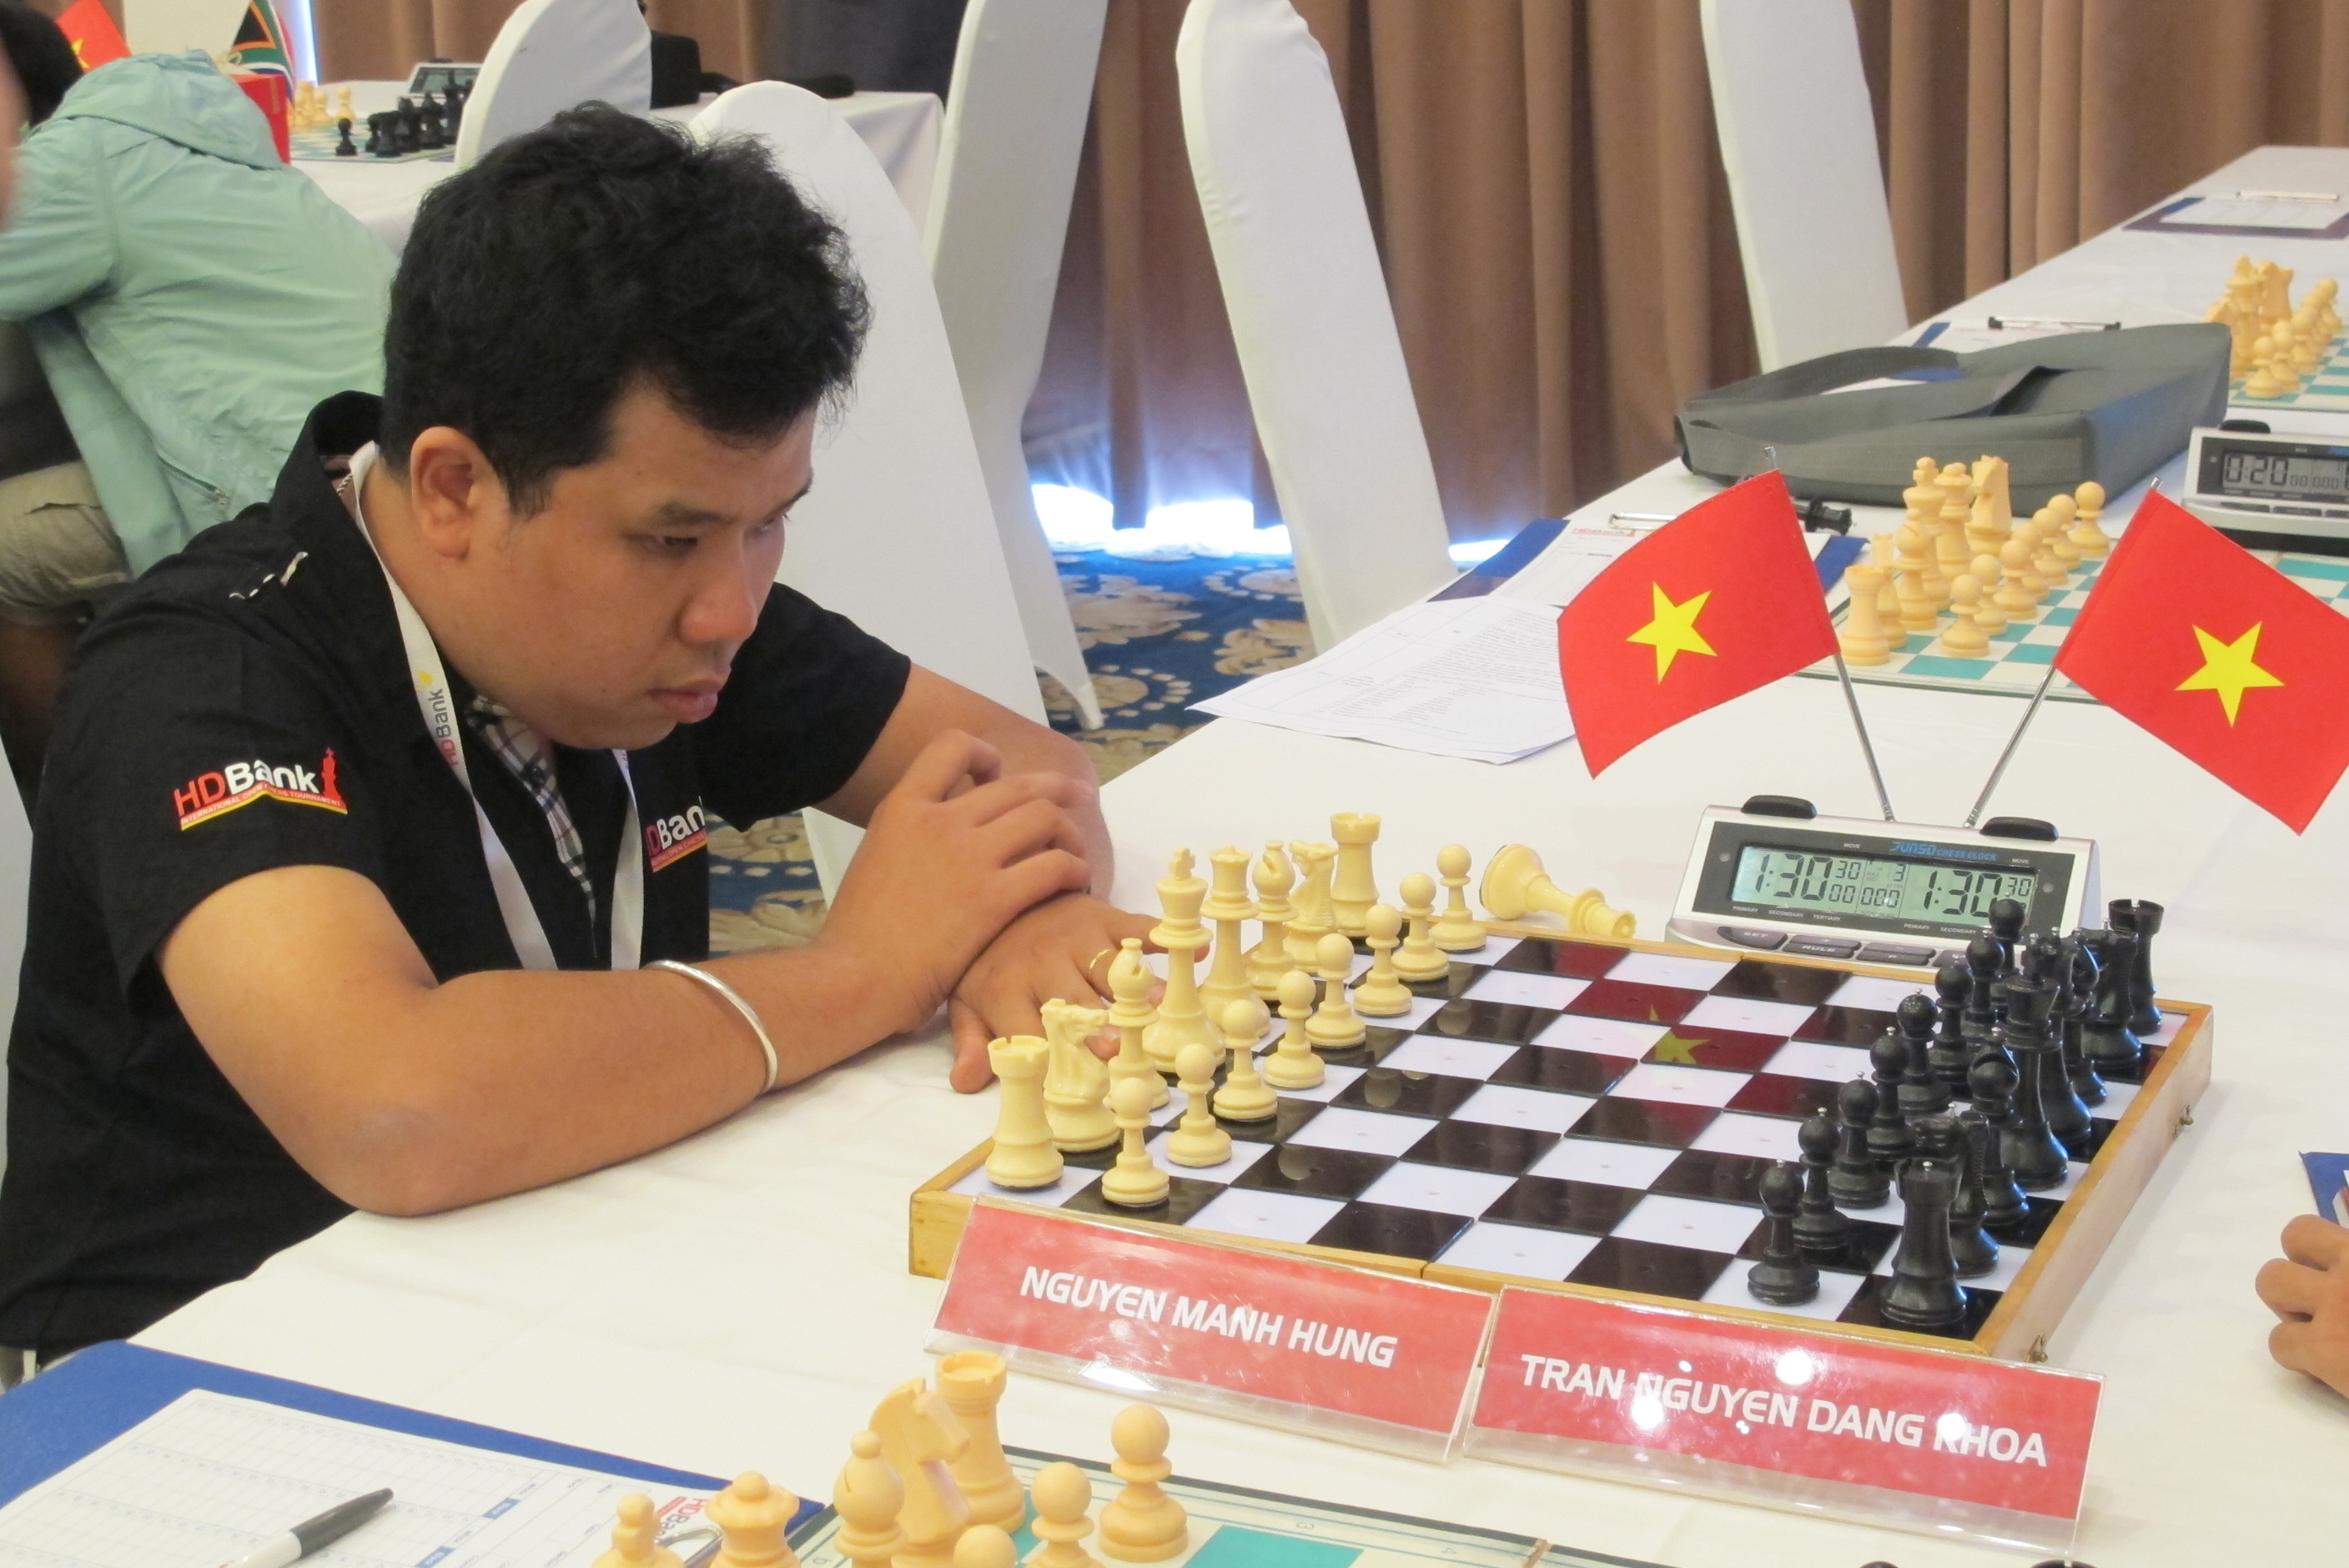 Nguyen Manh Hung competes in the HDBank international open chess tournament 